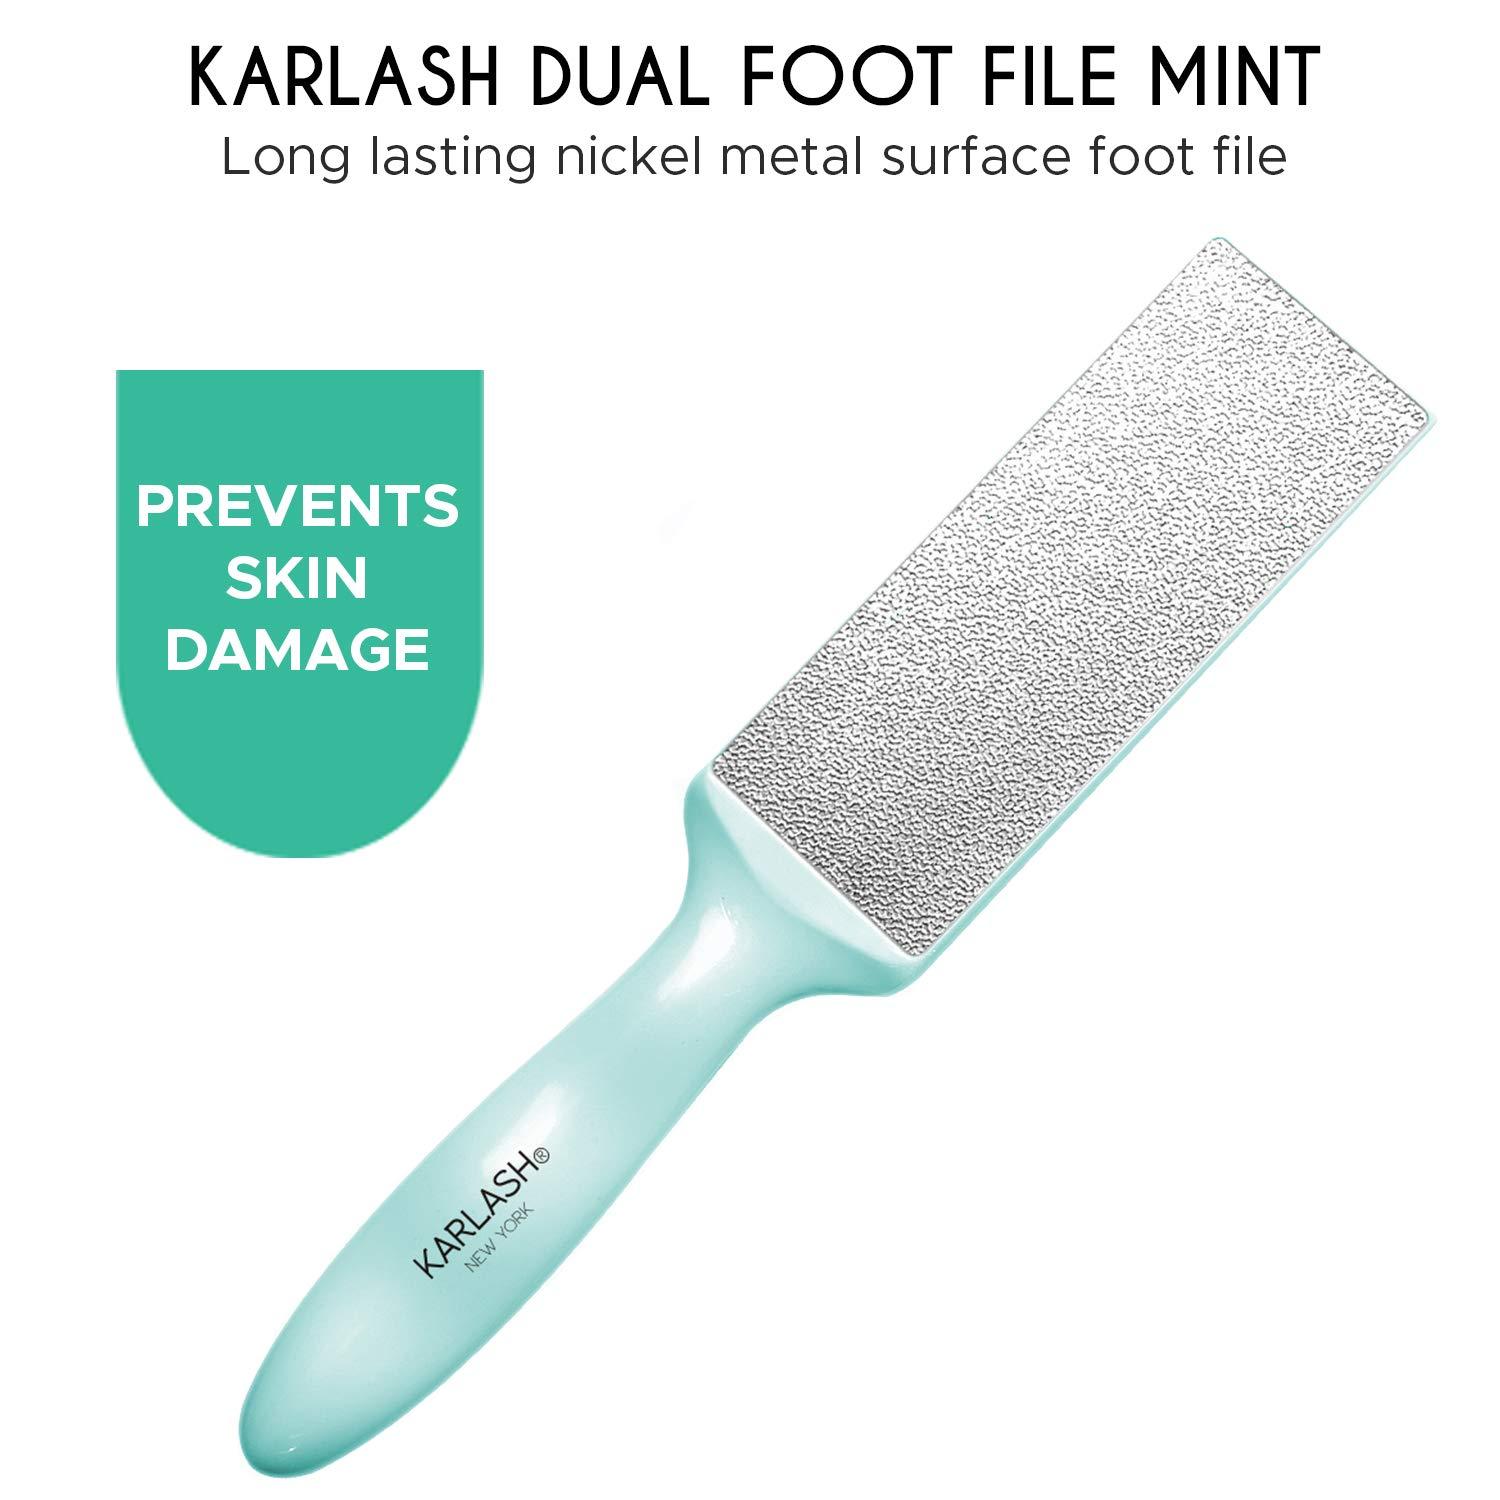 Karlash 2-Sided Nickel Foot File for Callus Trimming and Callus